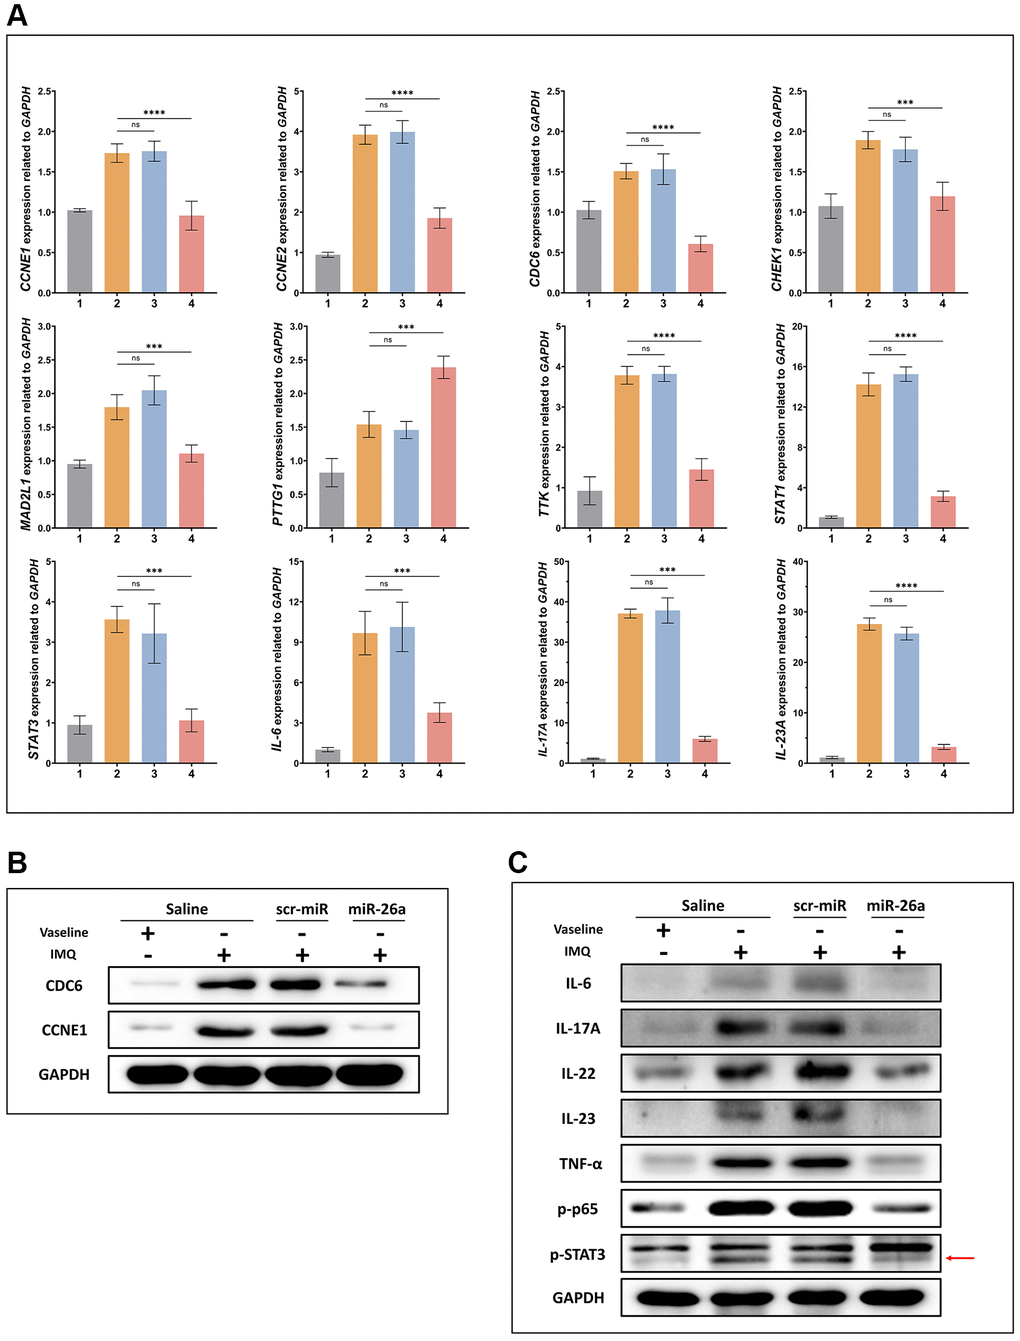 Expression of proteins and genes related to psoriasis. (A) mRNA expression of CDC6, CCNE1, and representative genes of the IL-23/IL-17A/STAT3 axis was detected in the IMQ-induced mouse model using qRT-PCR. (B, C) The protein expression of CDC6, CCNE1, and representative genes of the IL-23/IL-17A/STAT3 axis was examined in the IMQ-induced mouse model using Western blotting. The data are presented as the mean ± SD (n = 5). *p **p ***p ****p 